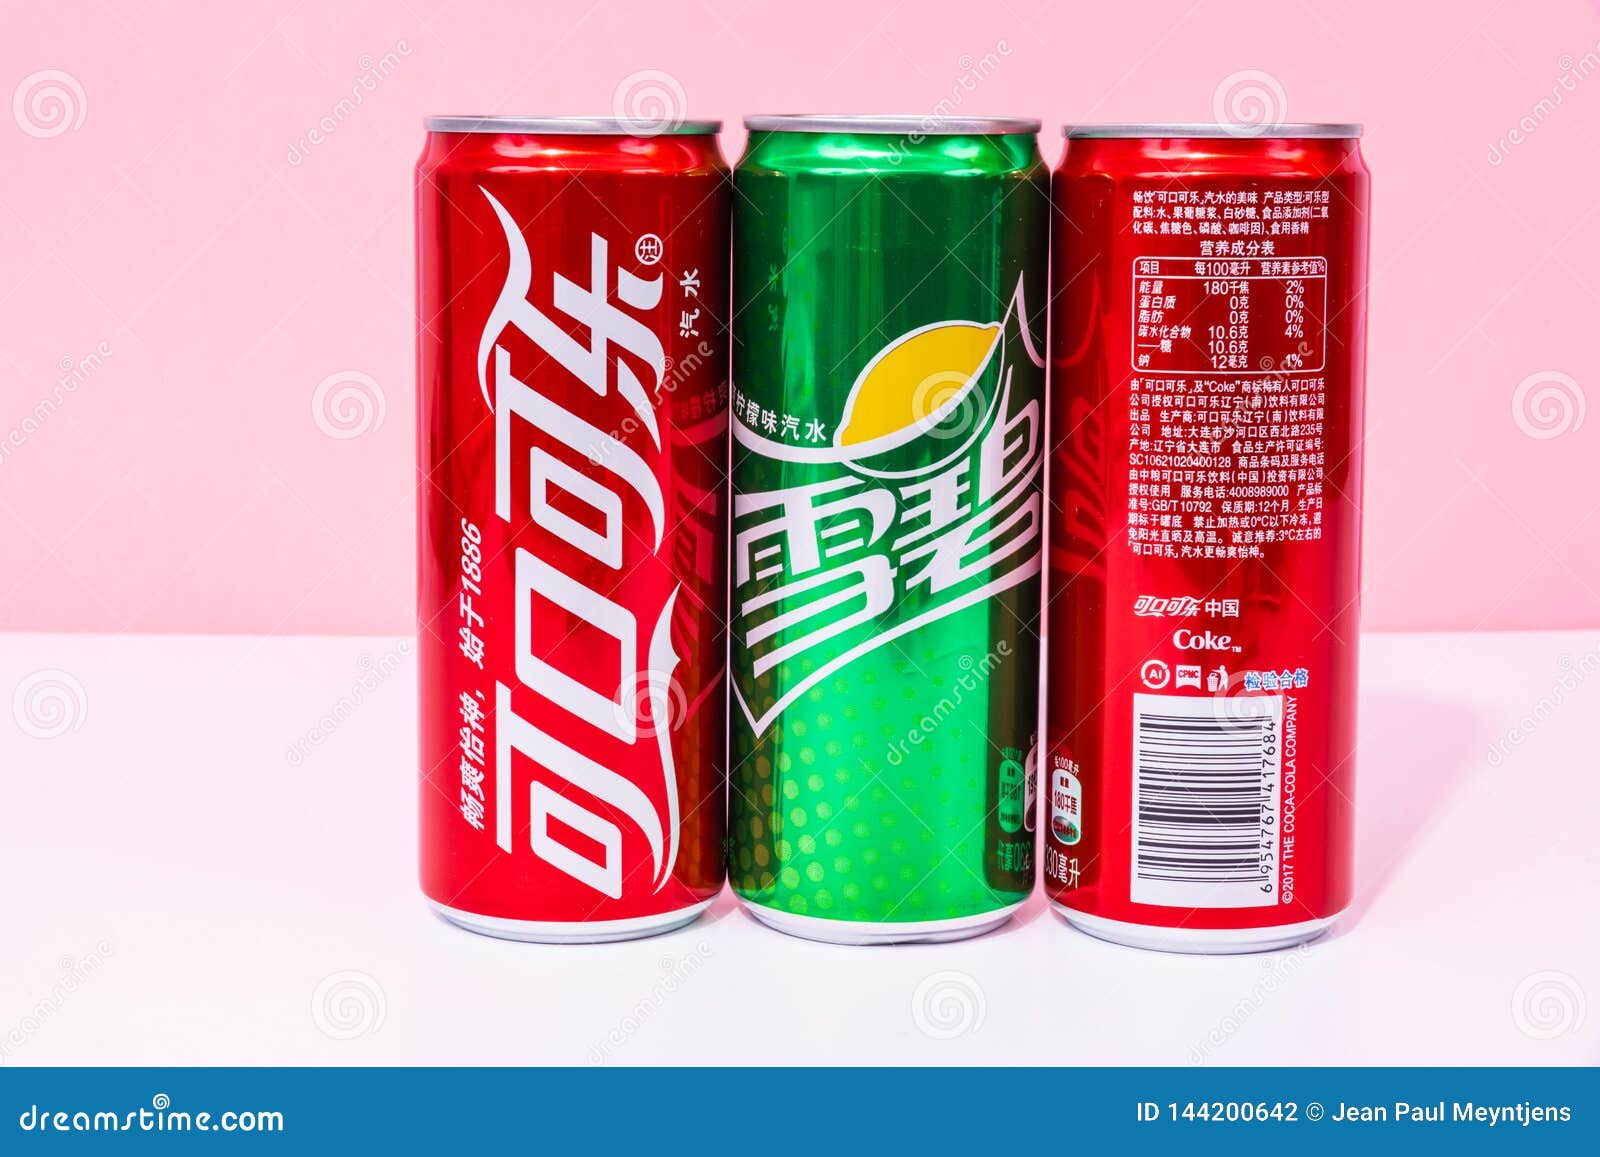 two-cans-coca-cola-one-can-sprite-written-chinese-peniscola-castellon-spain-april-drinks-isolated-pink-color-144200642.jpg